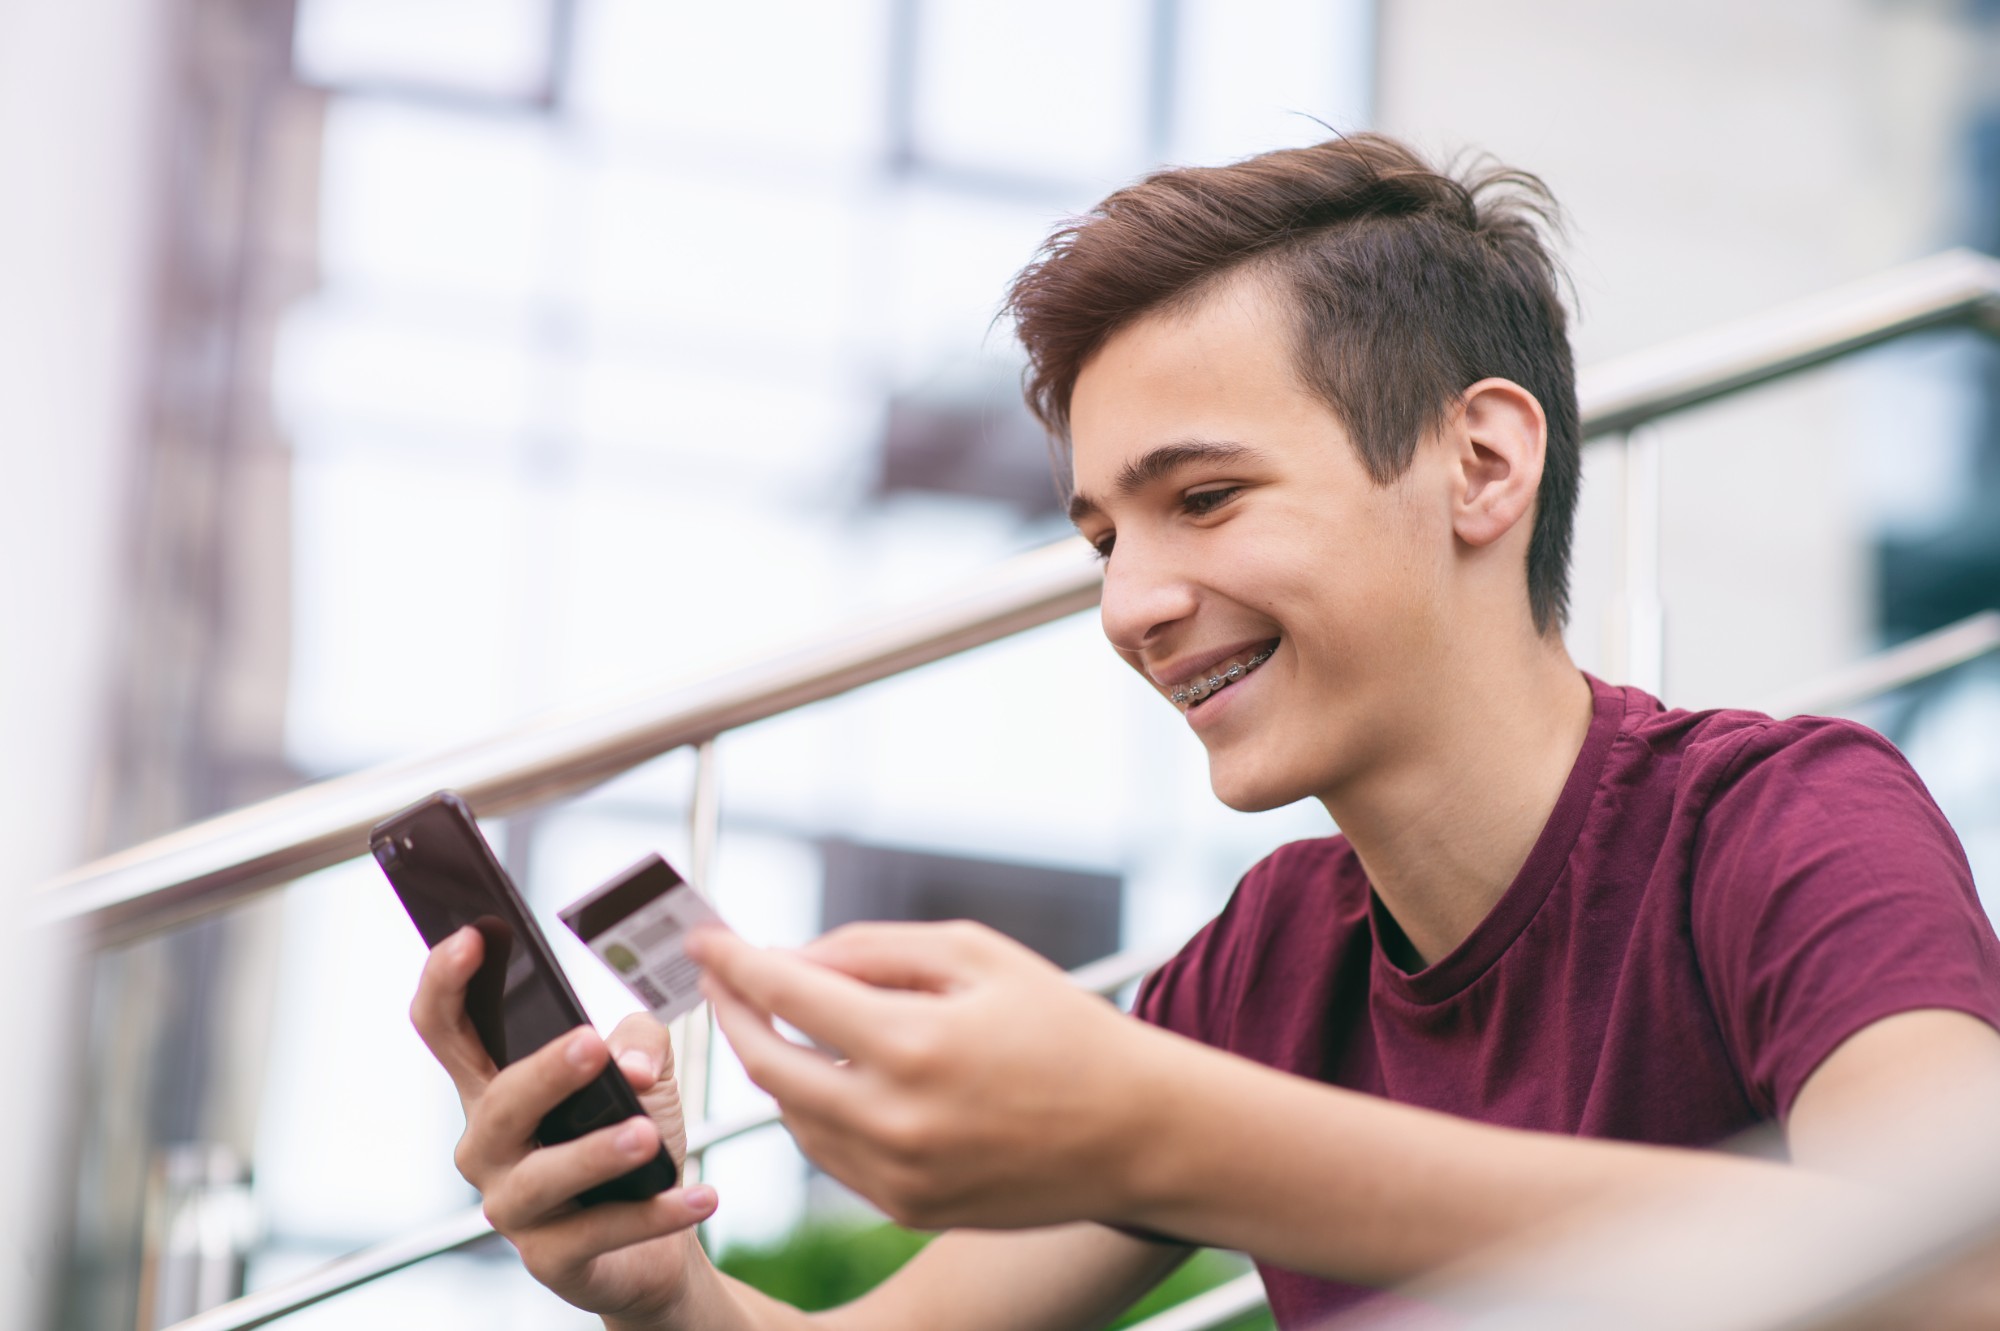 Teenage boy with a credit card and mobile phone makes purchasing outdoors. Happy young man is using smartphone and bank card for online shopping. Handsome smiling guy holds bank card and cell phone